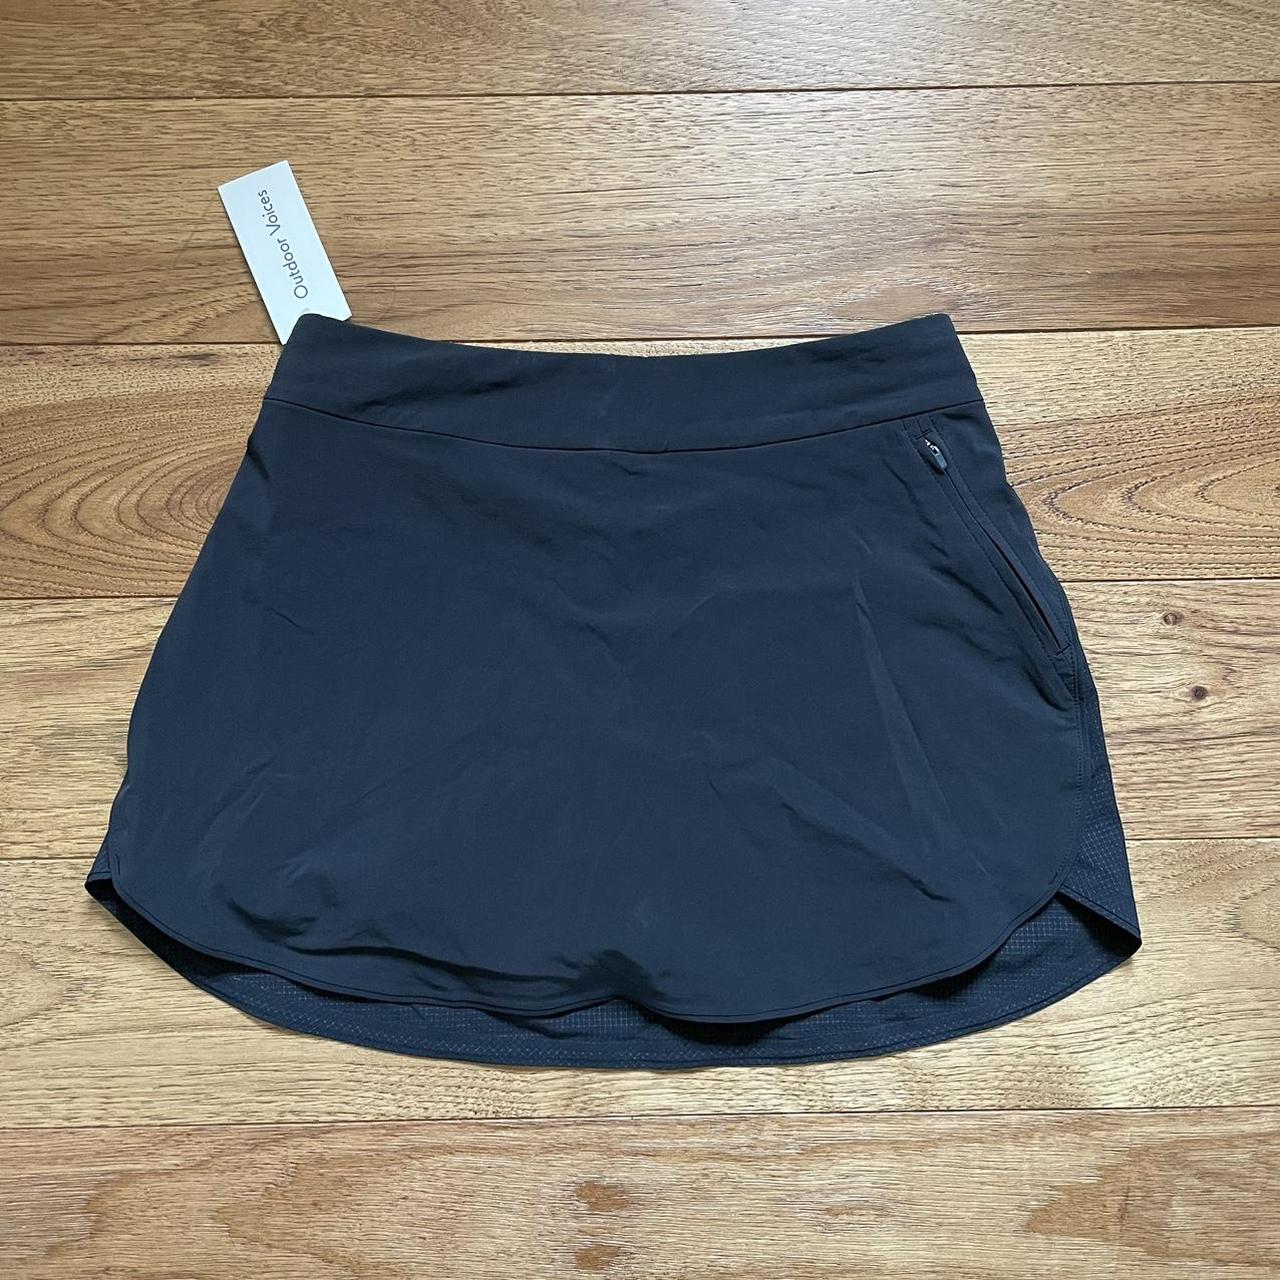 Outdoor Voices skort, Brand New with tag - Depop